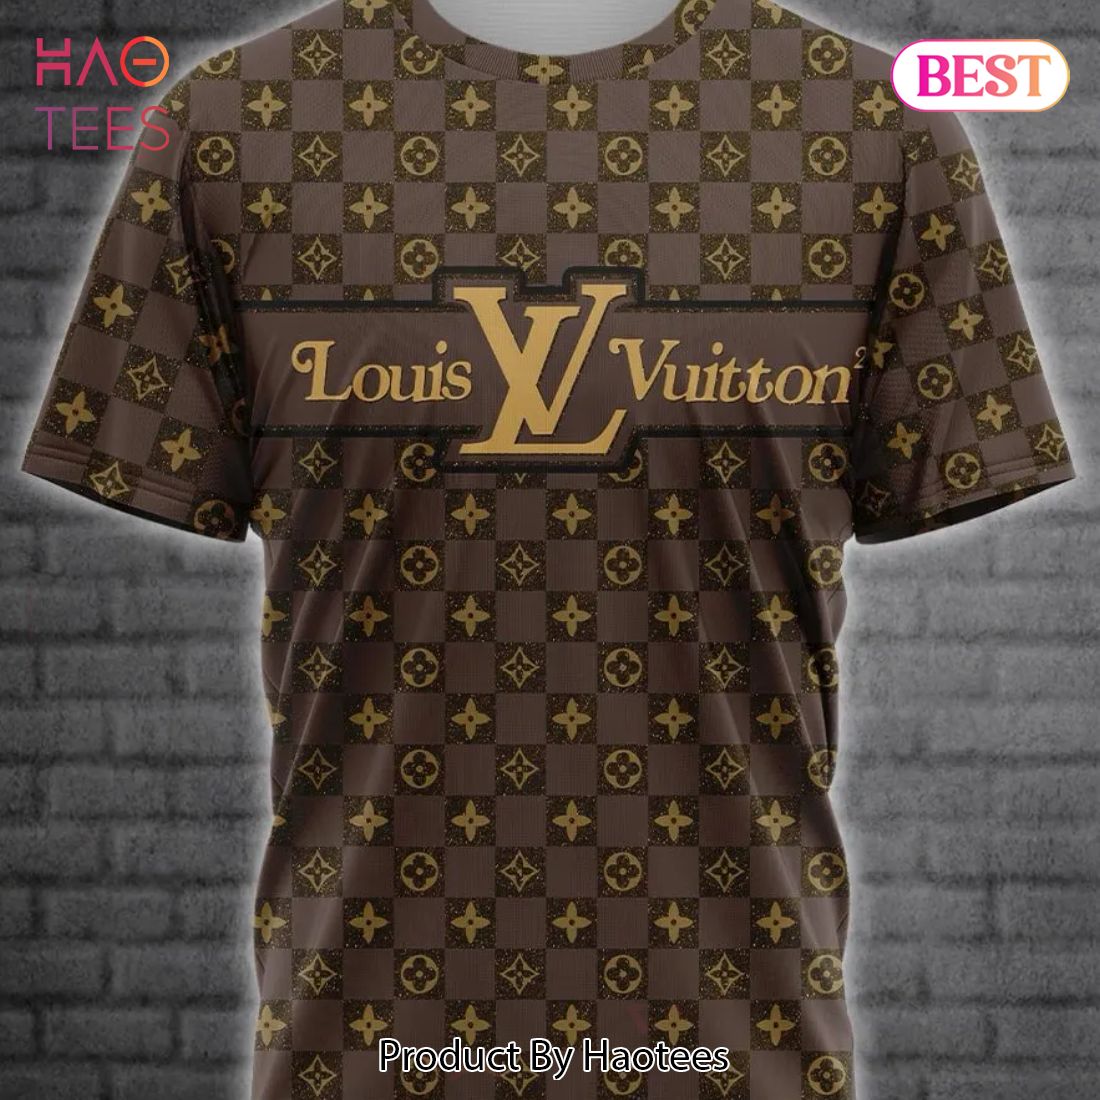 [NEW FASHION] Louis Vuitton Monogram Luxury Brand T-Shirt Outfit For